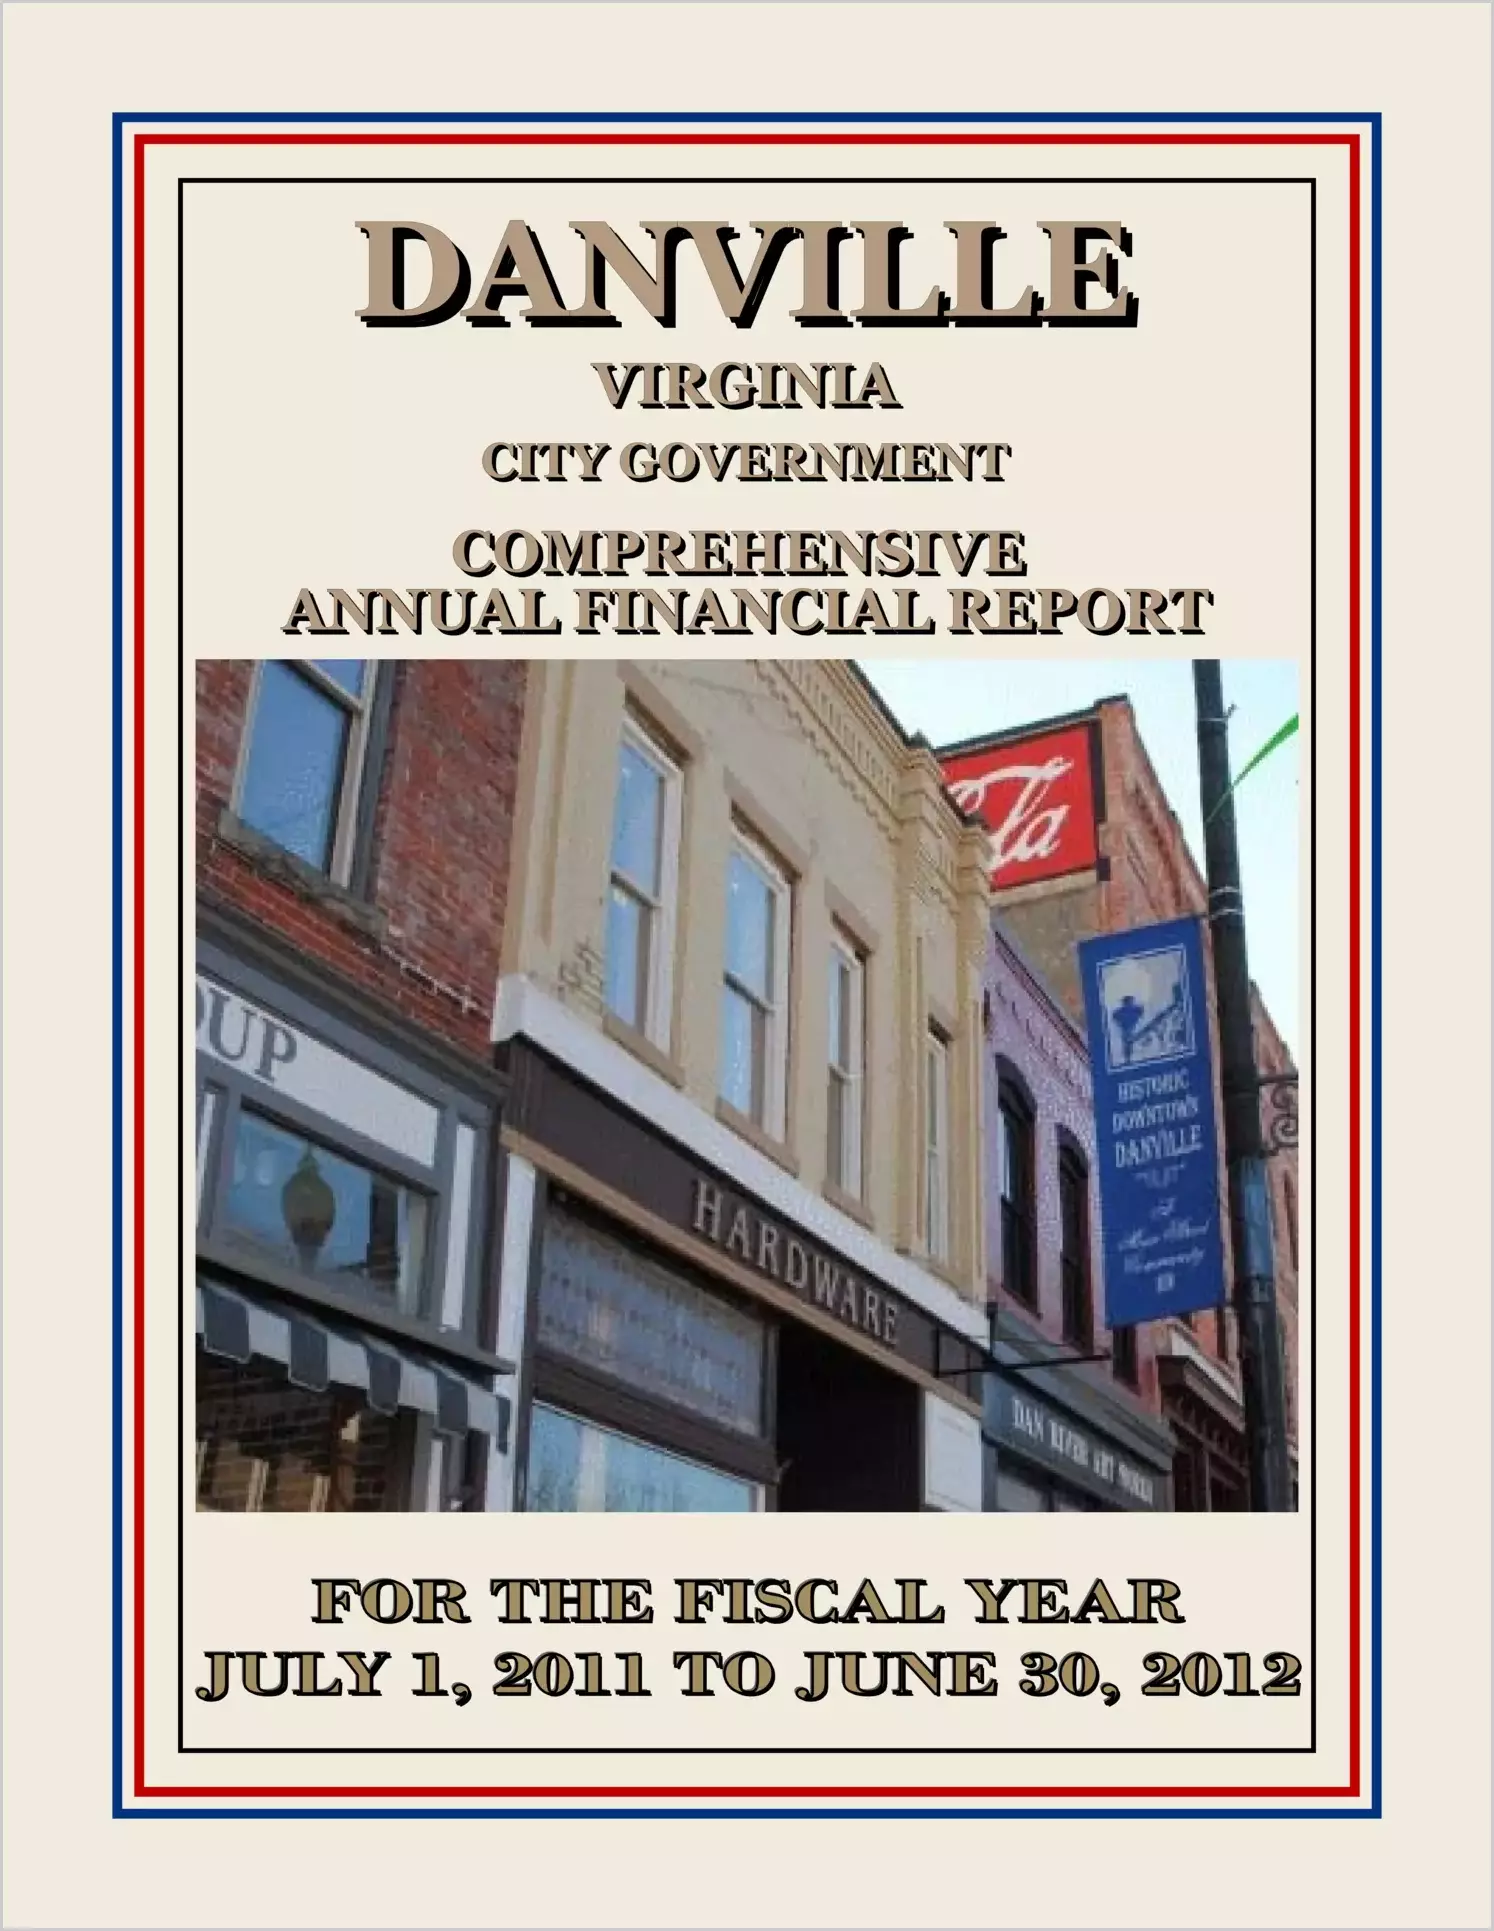 2012 Annual Financial Report for City of Danville